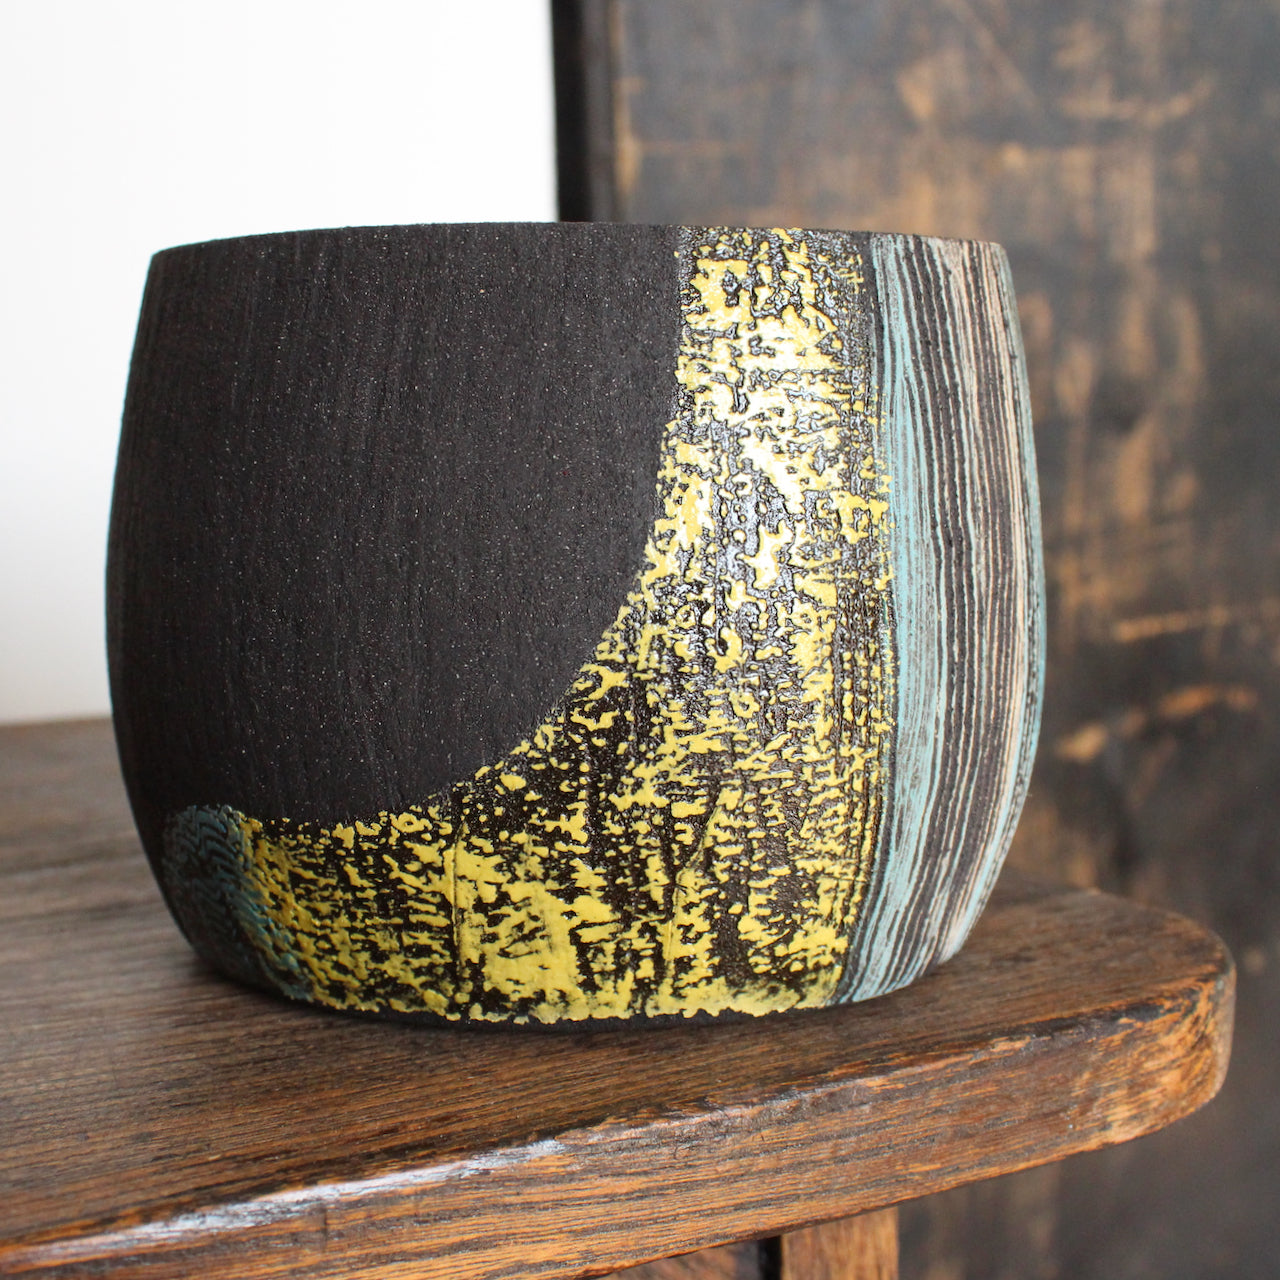 Ceramic vessel with blue, yellow and white glaze on dark brown clay by Cornish artist Anthea Bowen.